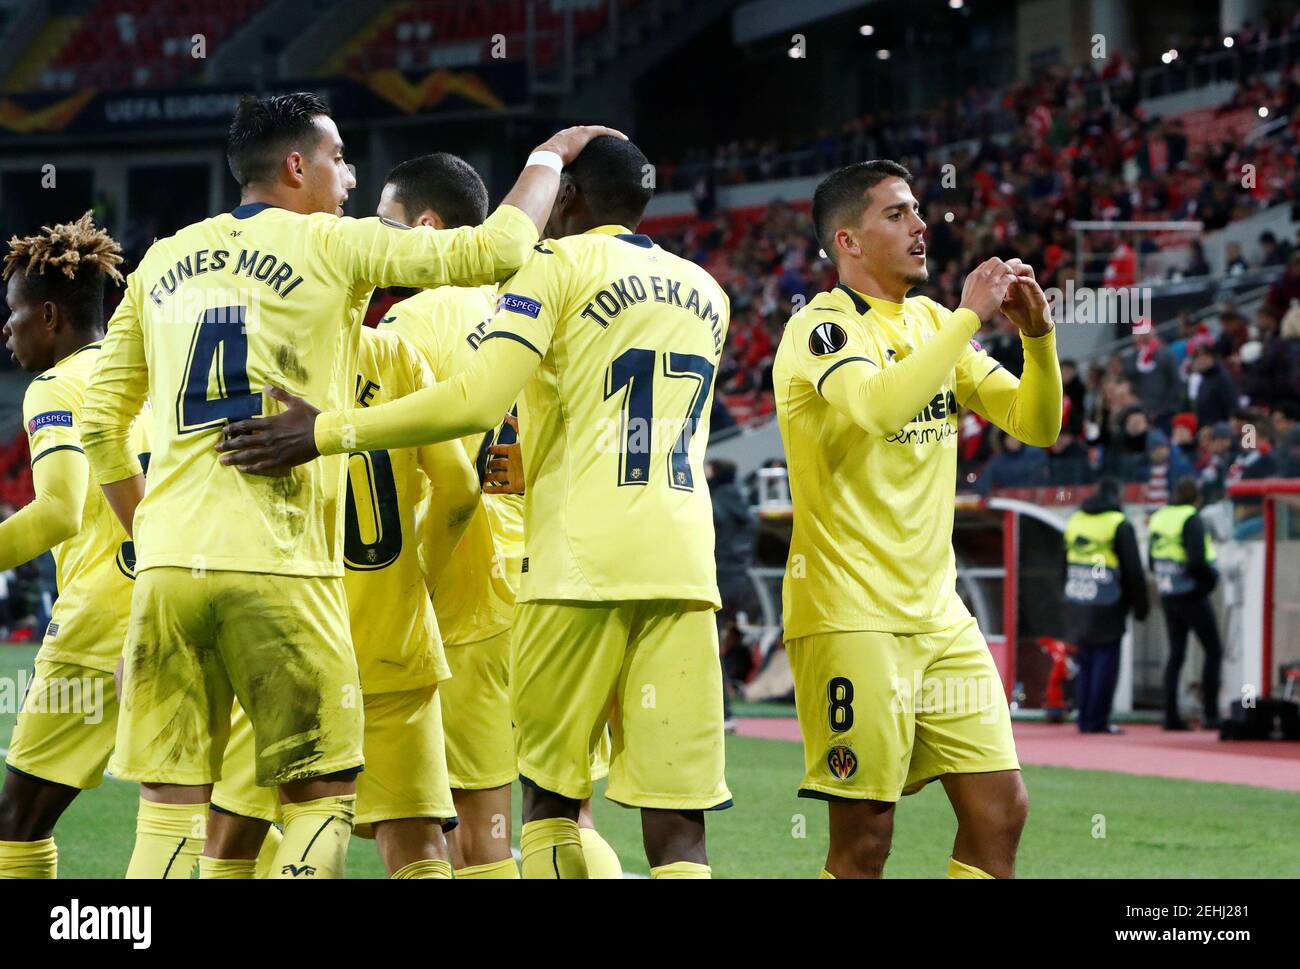 Soccer Football - Europa League - Group Stage - Group G - Spartak Moscow v Villarreal - Spartak Stadium, Moscow, Russia - October 4, 2018  Villarreal's Pablo Fornals celebrates scoring their second goal with Karl Toko Ekambi and team mates  REUTERS/Sergei Karpukhin Stock Photo